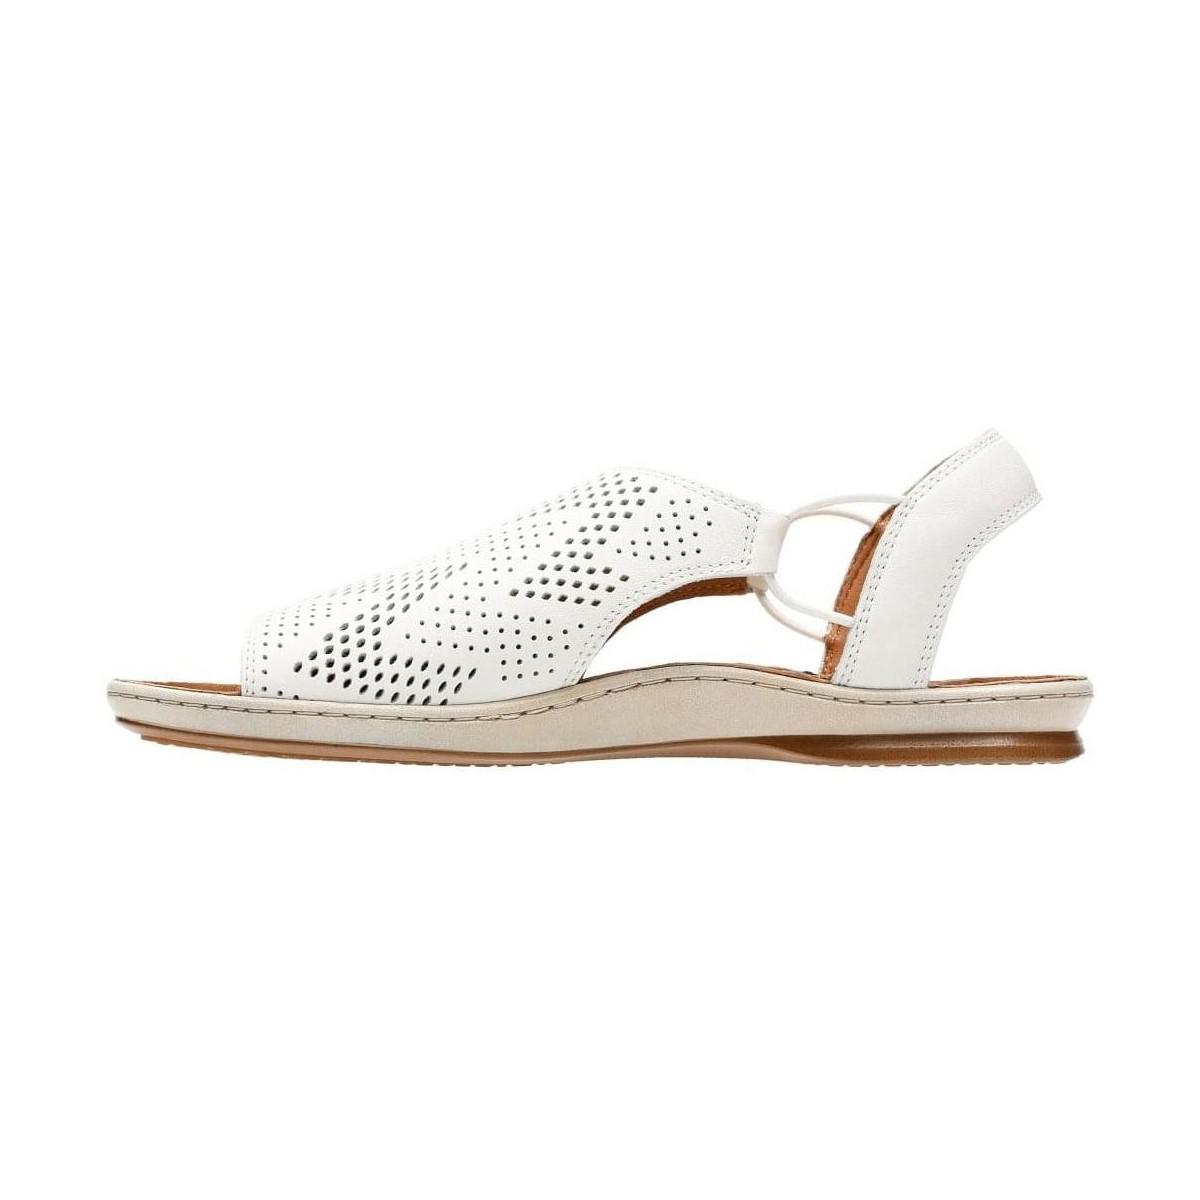 Clarks Leather Sarla Cadence Closed Toe Sandals in White - Lyst